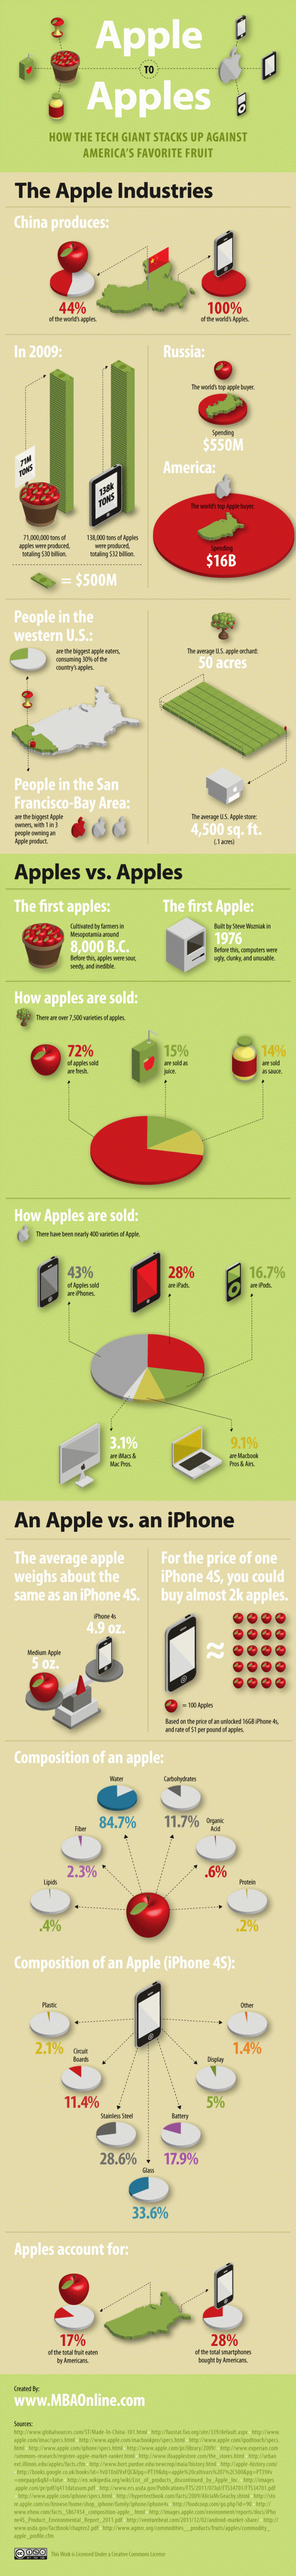 Comparing Apples to Apples [Infographic]